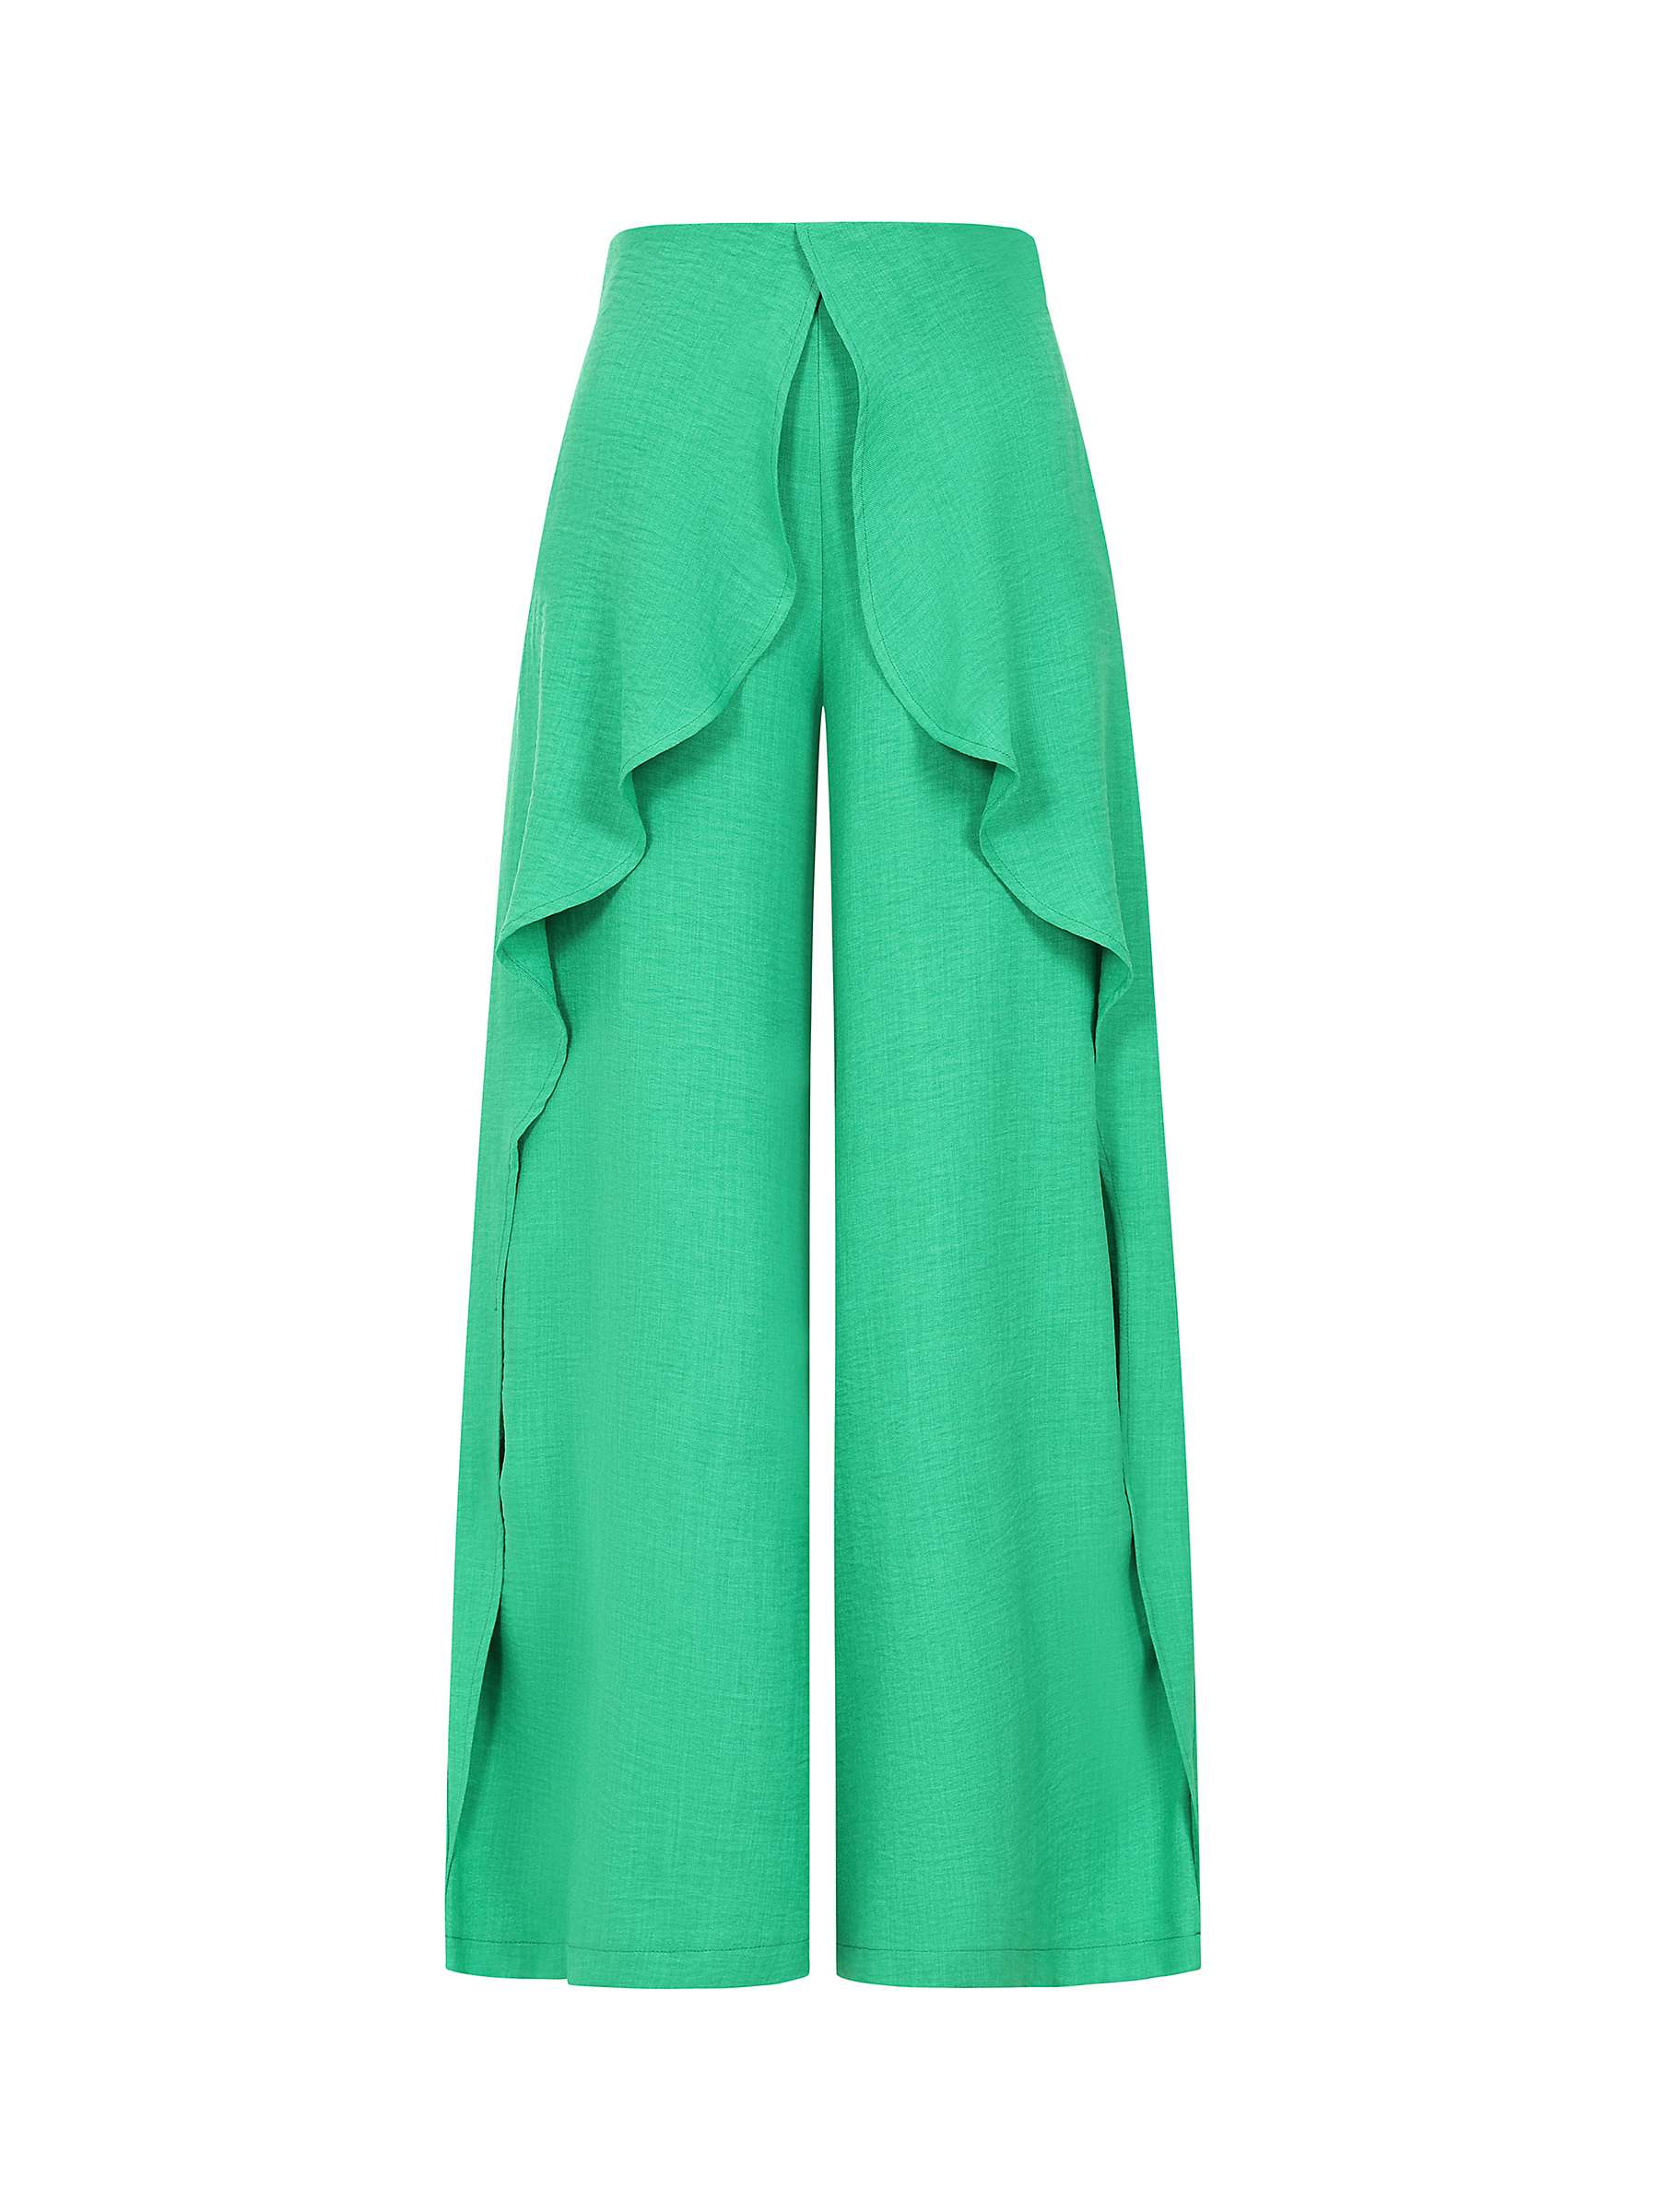 Buy HotSquash Palazzo Side Frill Trousers Online at johnlewis.com